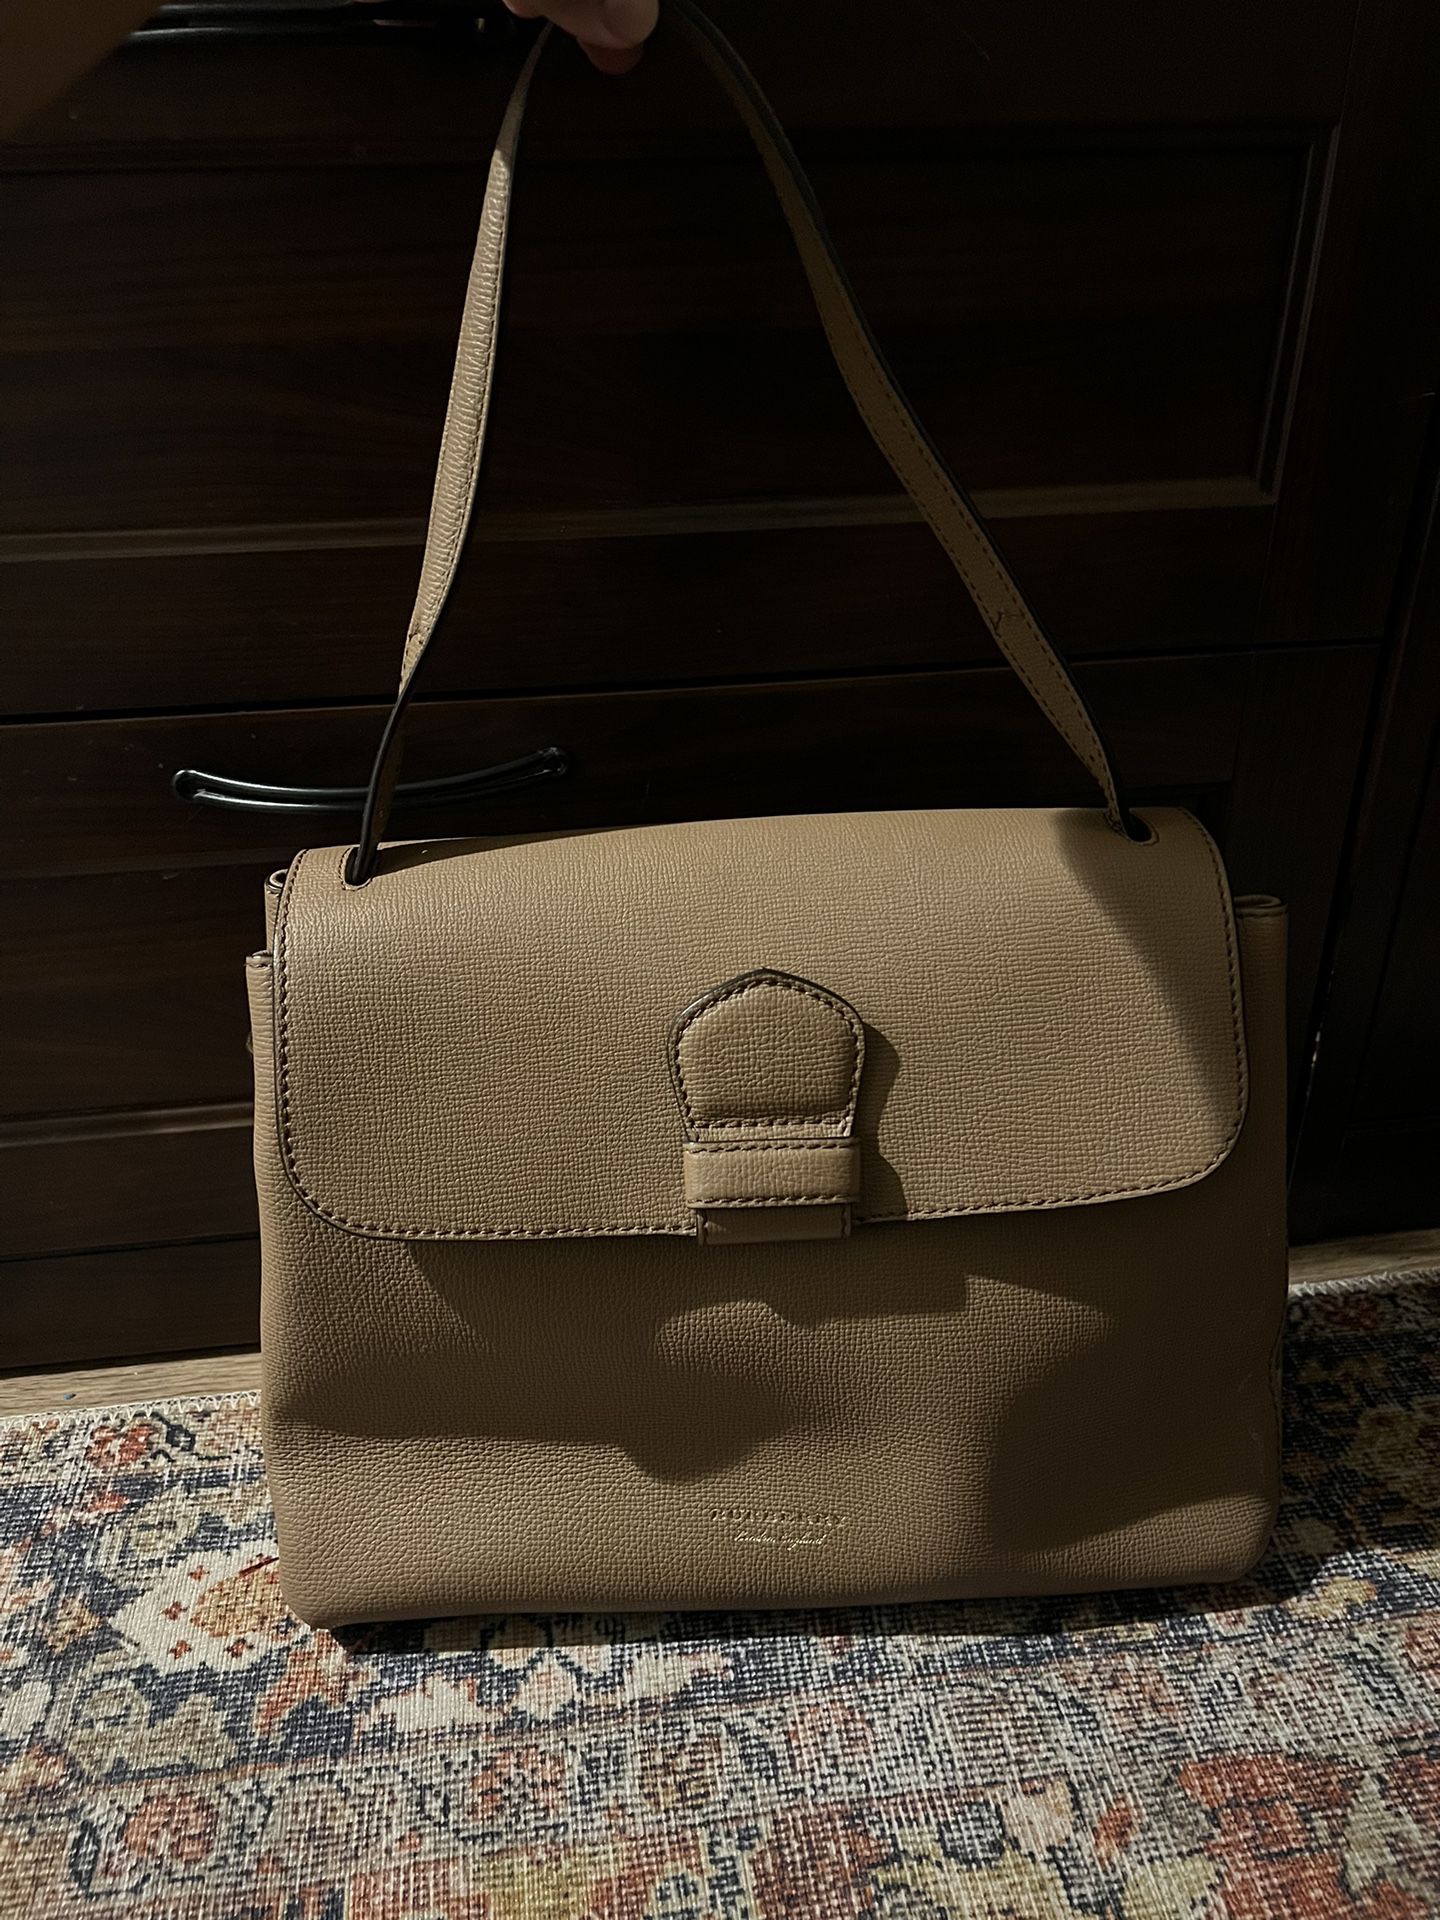 Burberry Camberley Top Handle Bag. Perfect Condition, Comes With Extra Strap, Tag, Card, Dust Bag. Retails $1590, Selling For $1000. Must Go Asap!  